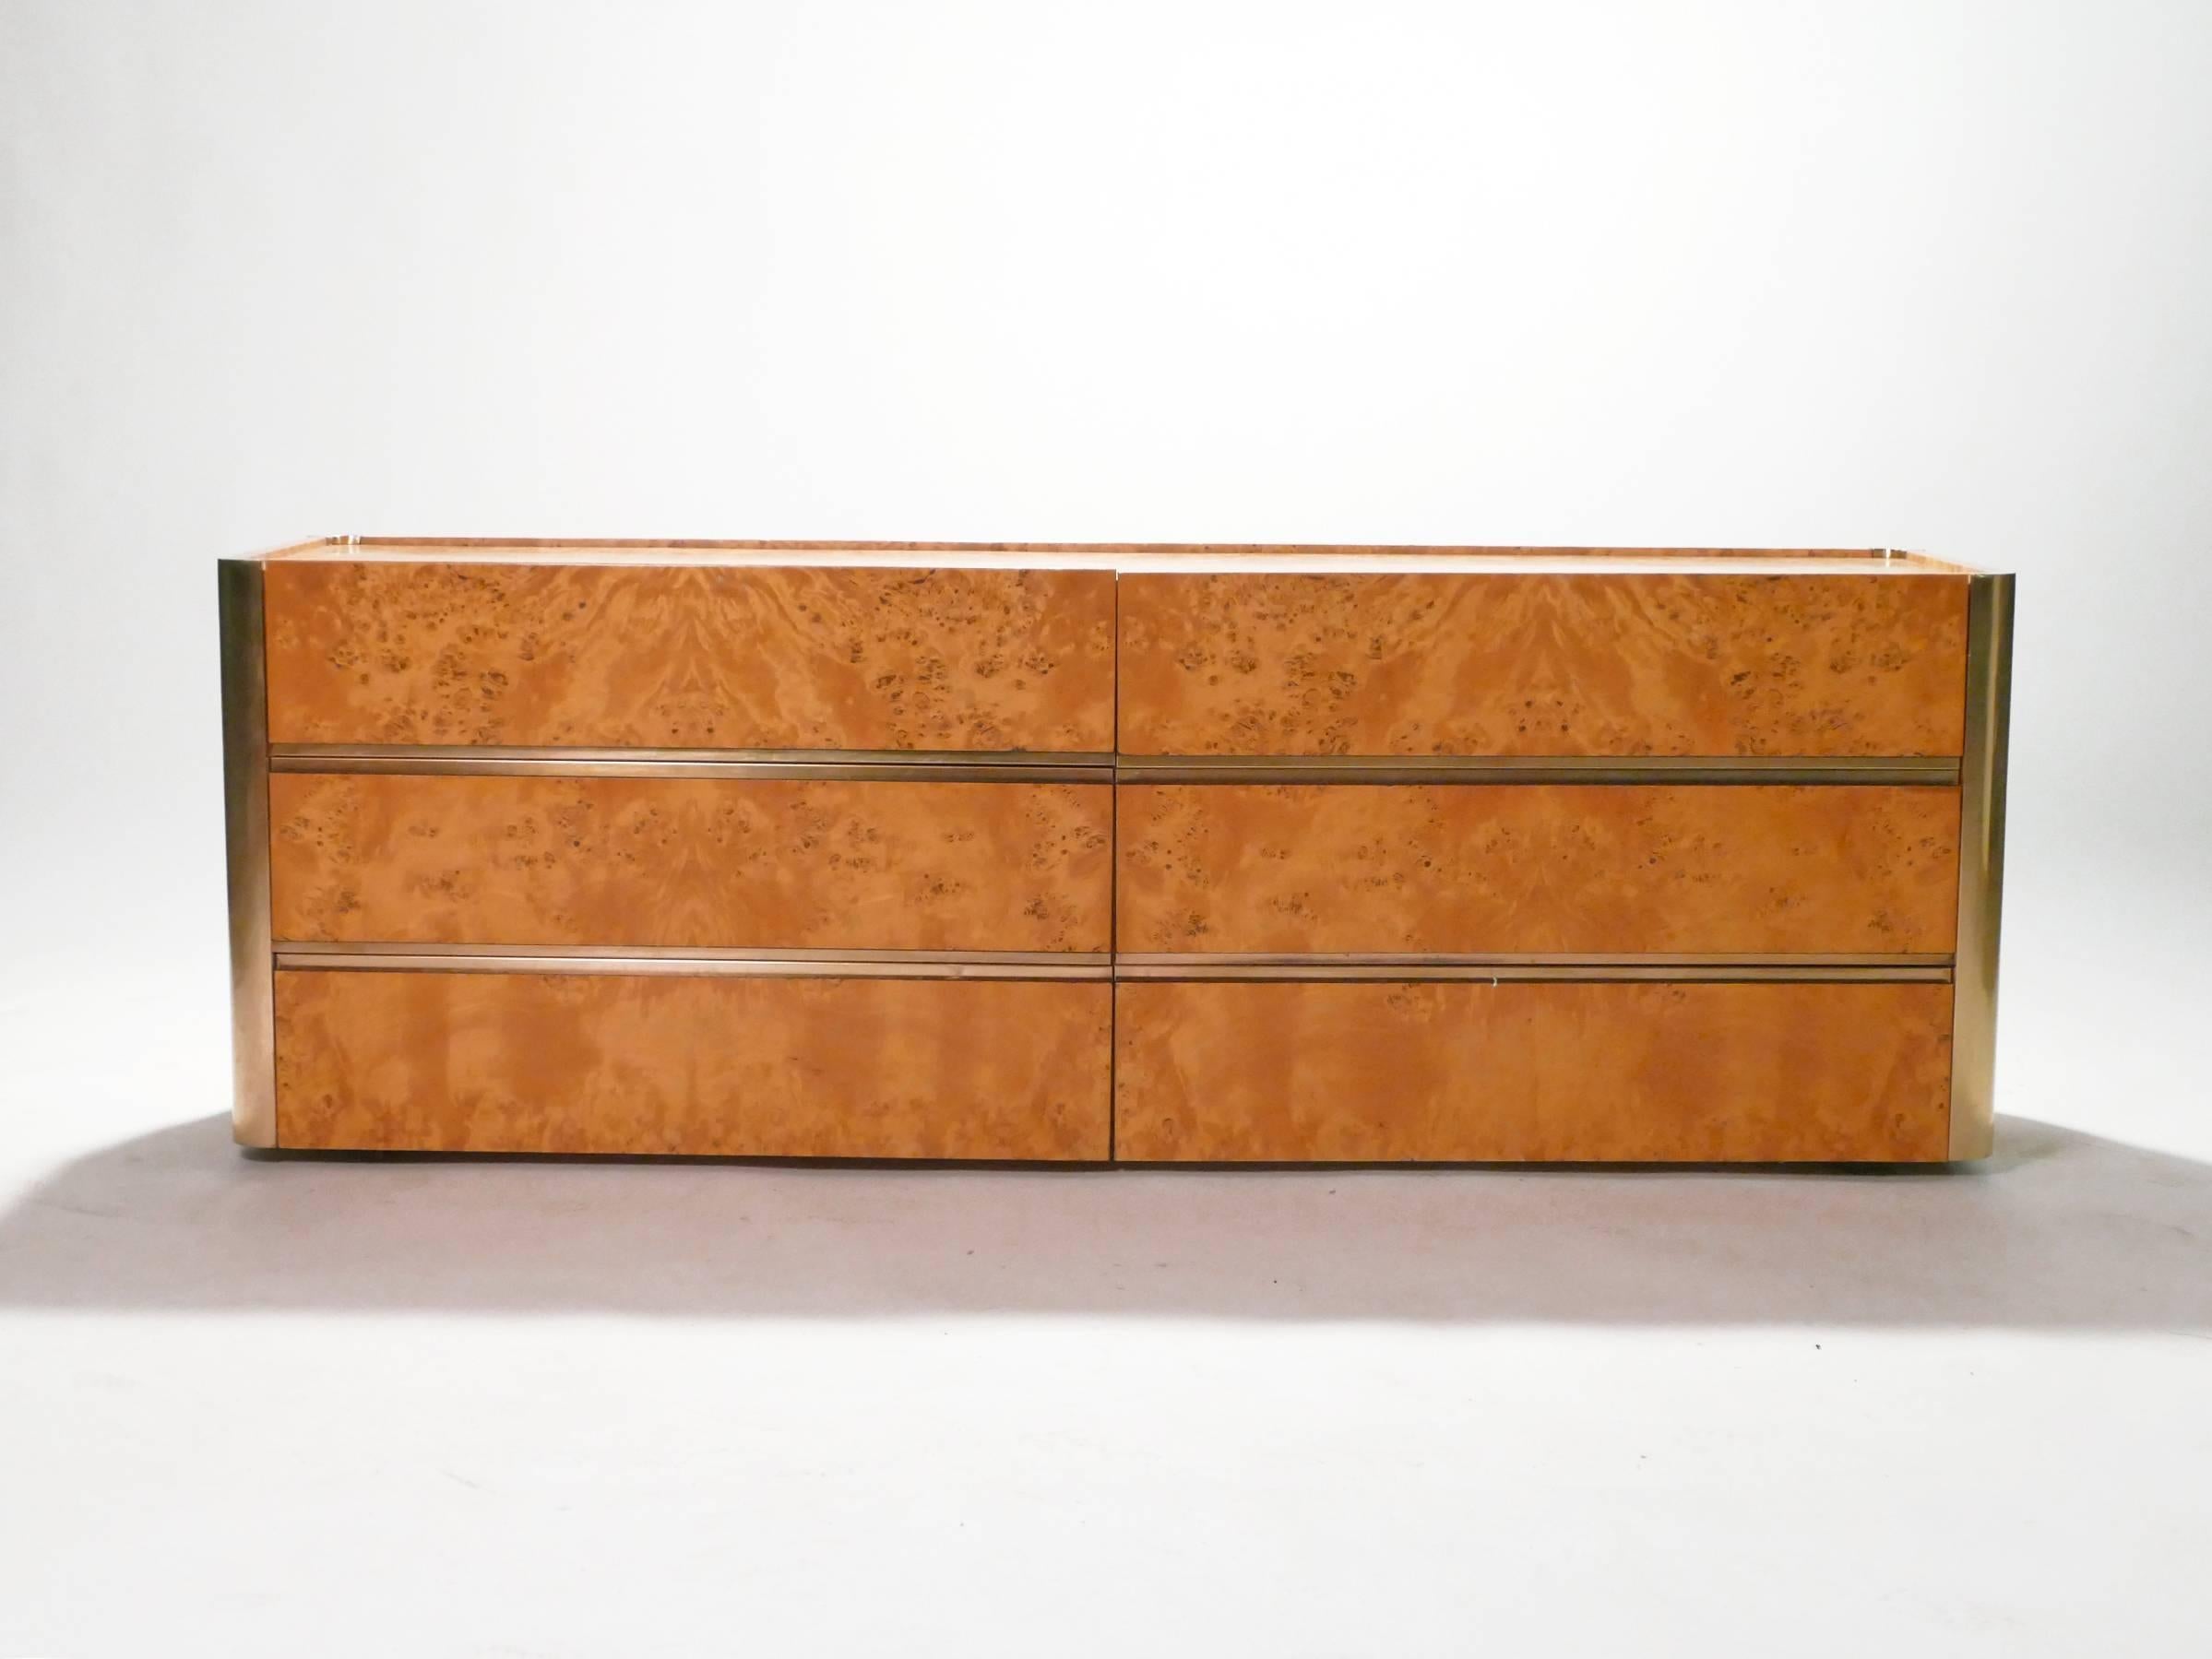 Famed Italian furniture designer Willy Rizzo, known for his luxurious work commissioned by the members of midcentury High Society, created this chest of drawers in the 1970s. The bulk of the piece is a warm burl wood, with brass accents noted